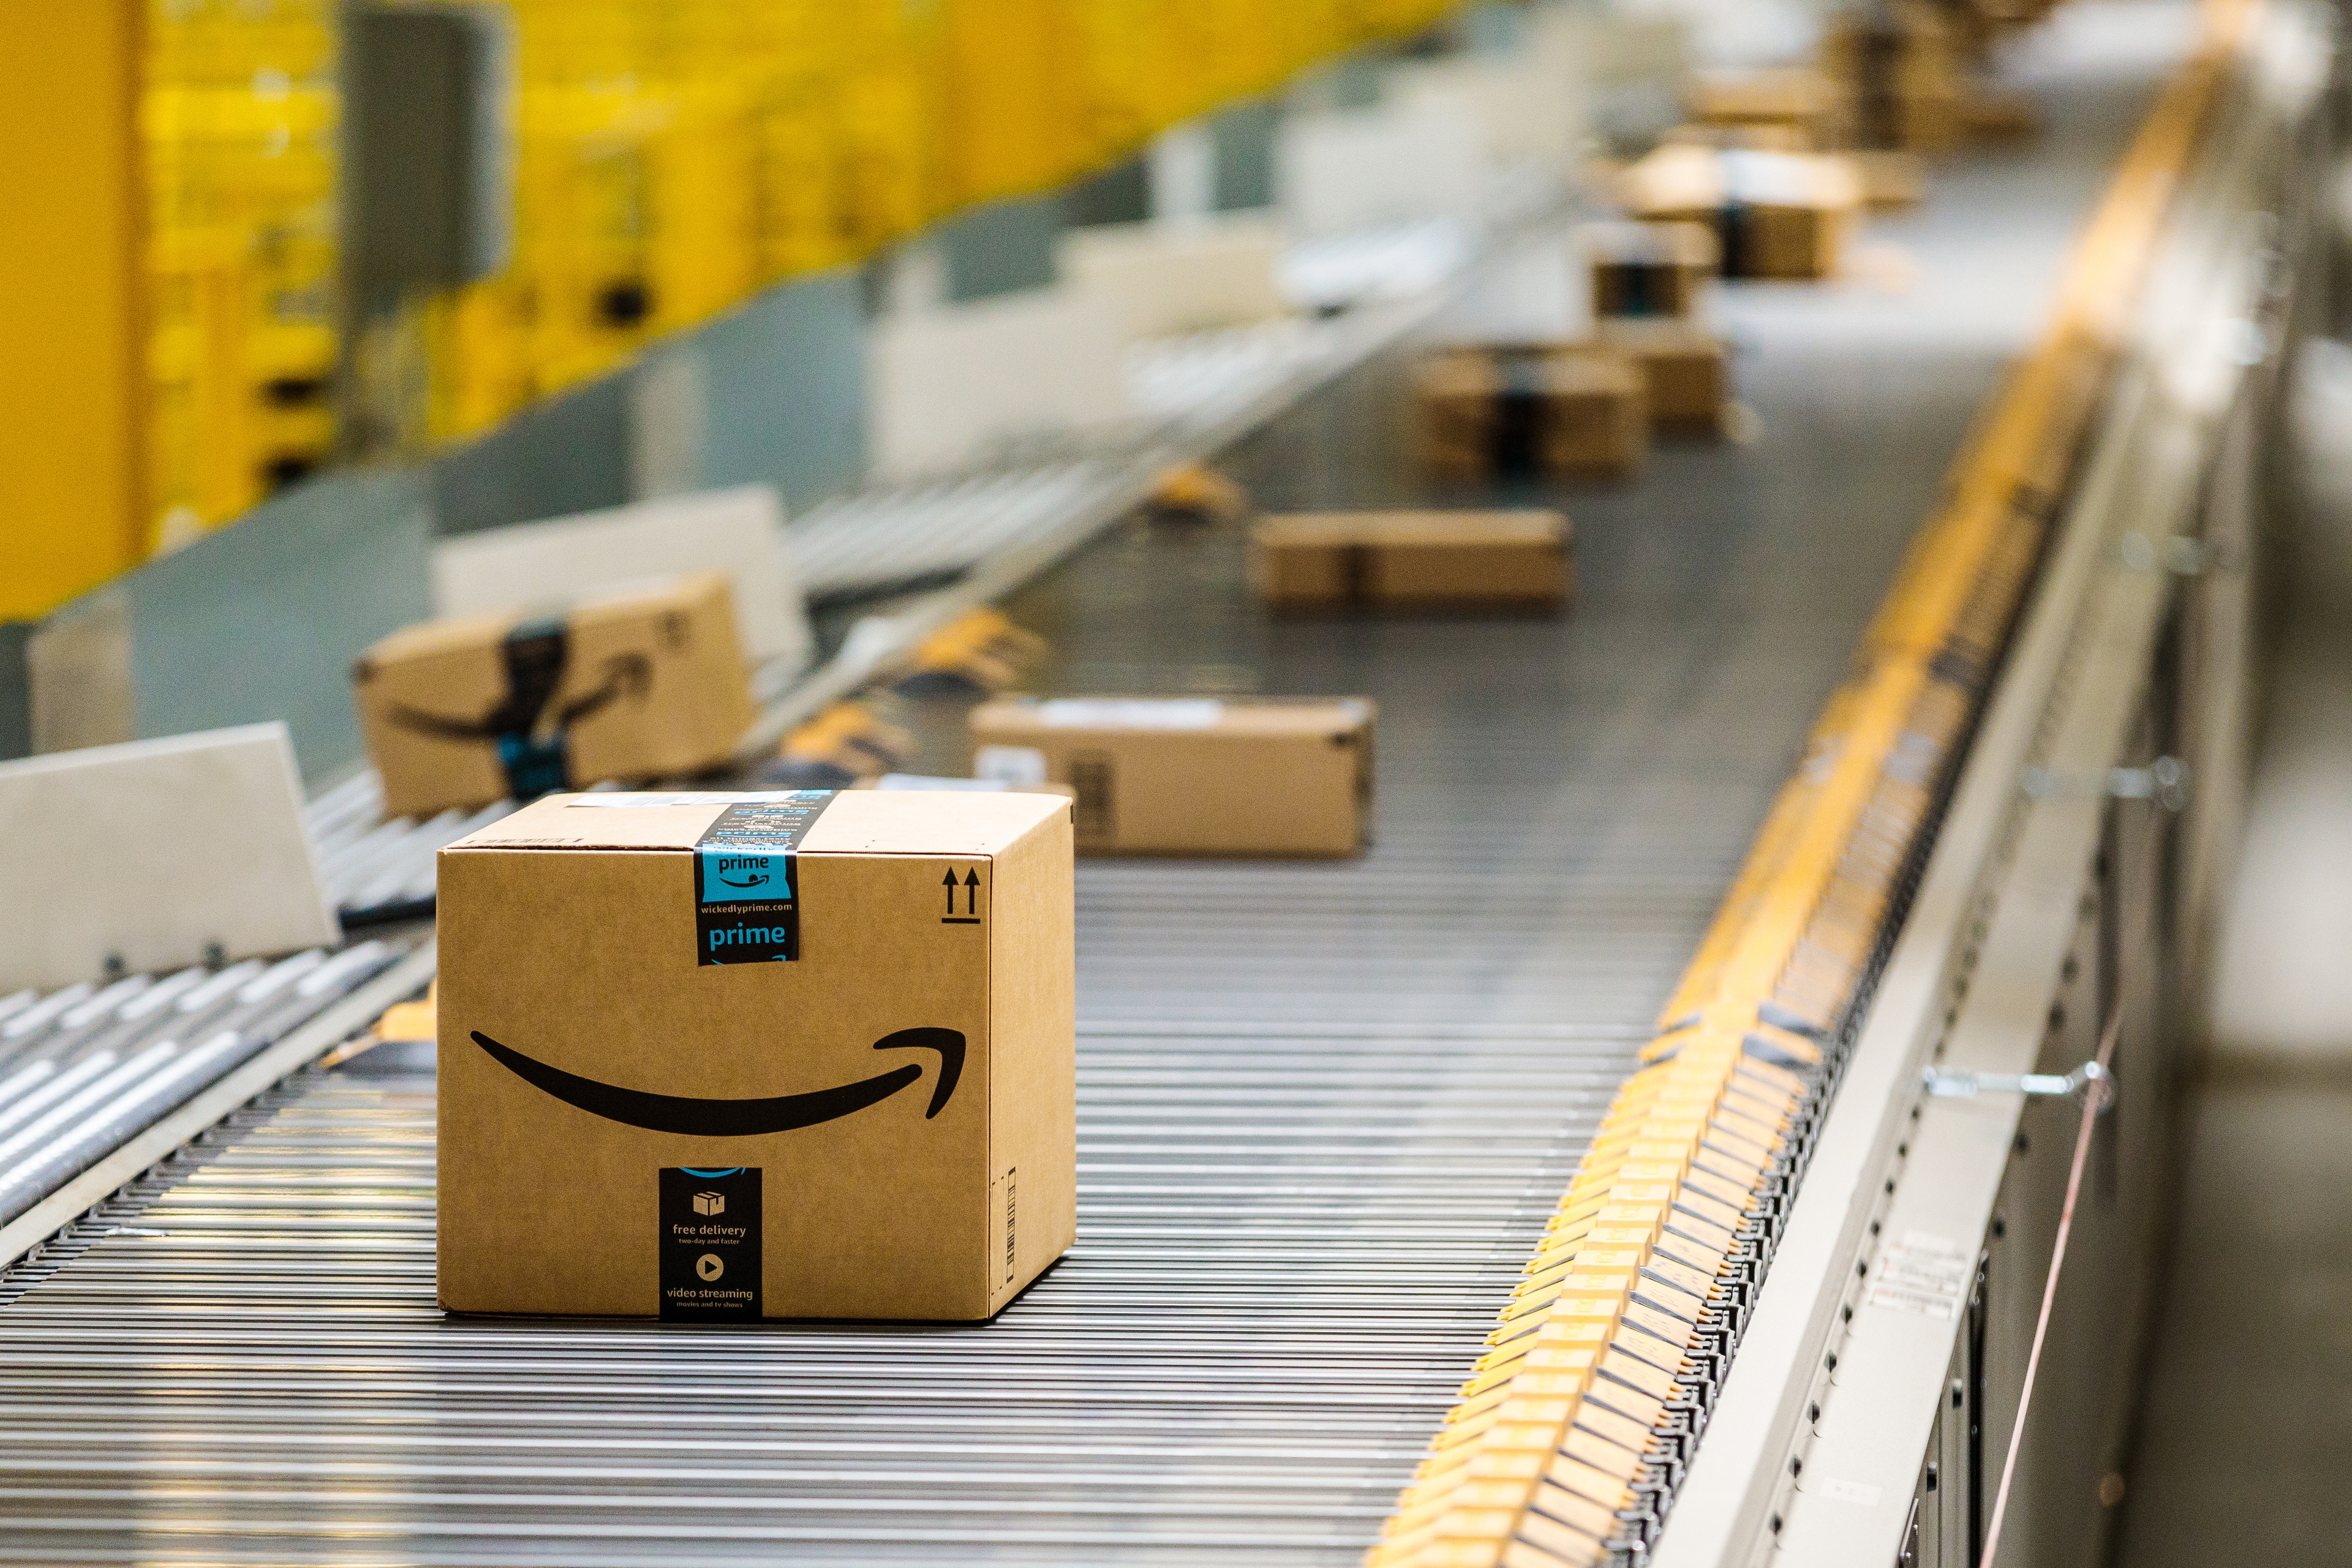 Amazon delivery boxes roll down a conveyor belt at Amazon's warehouse in Baltimore, Maryland.